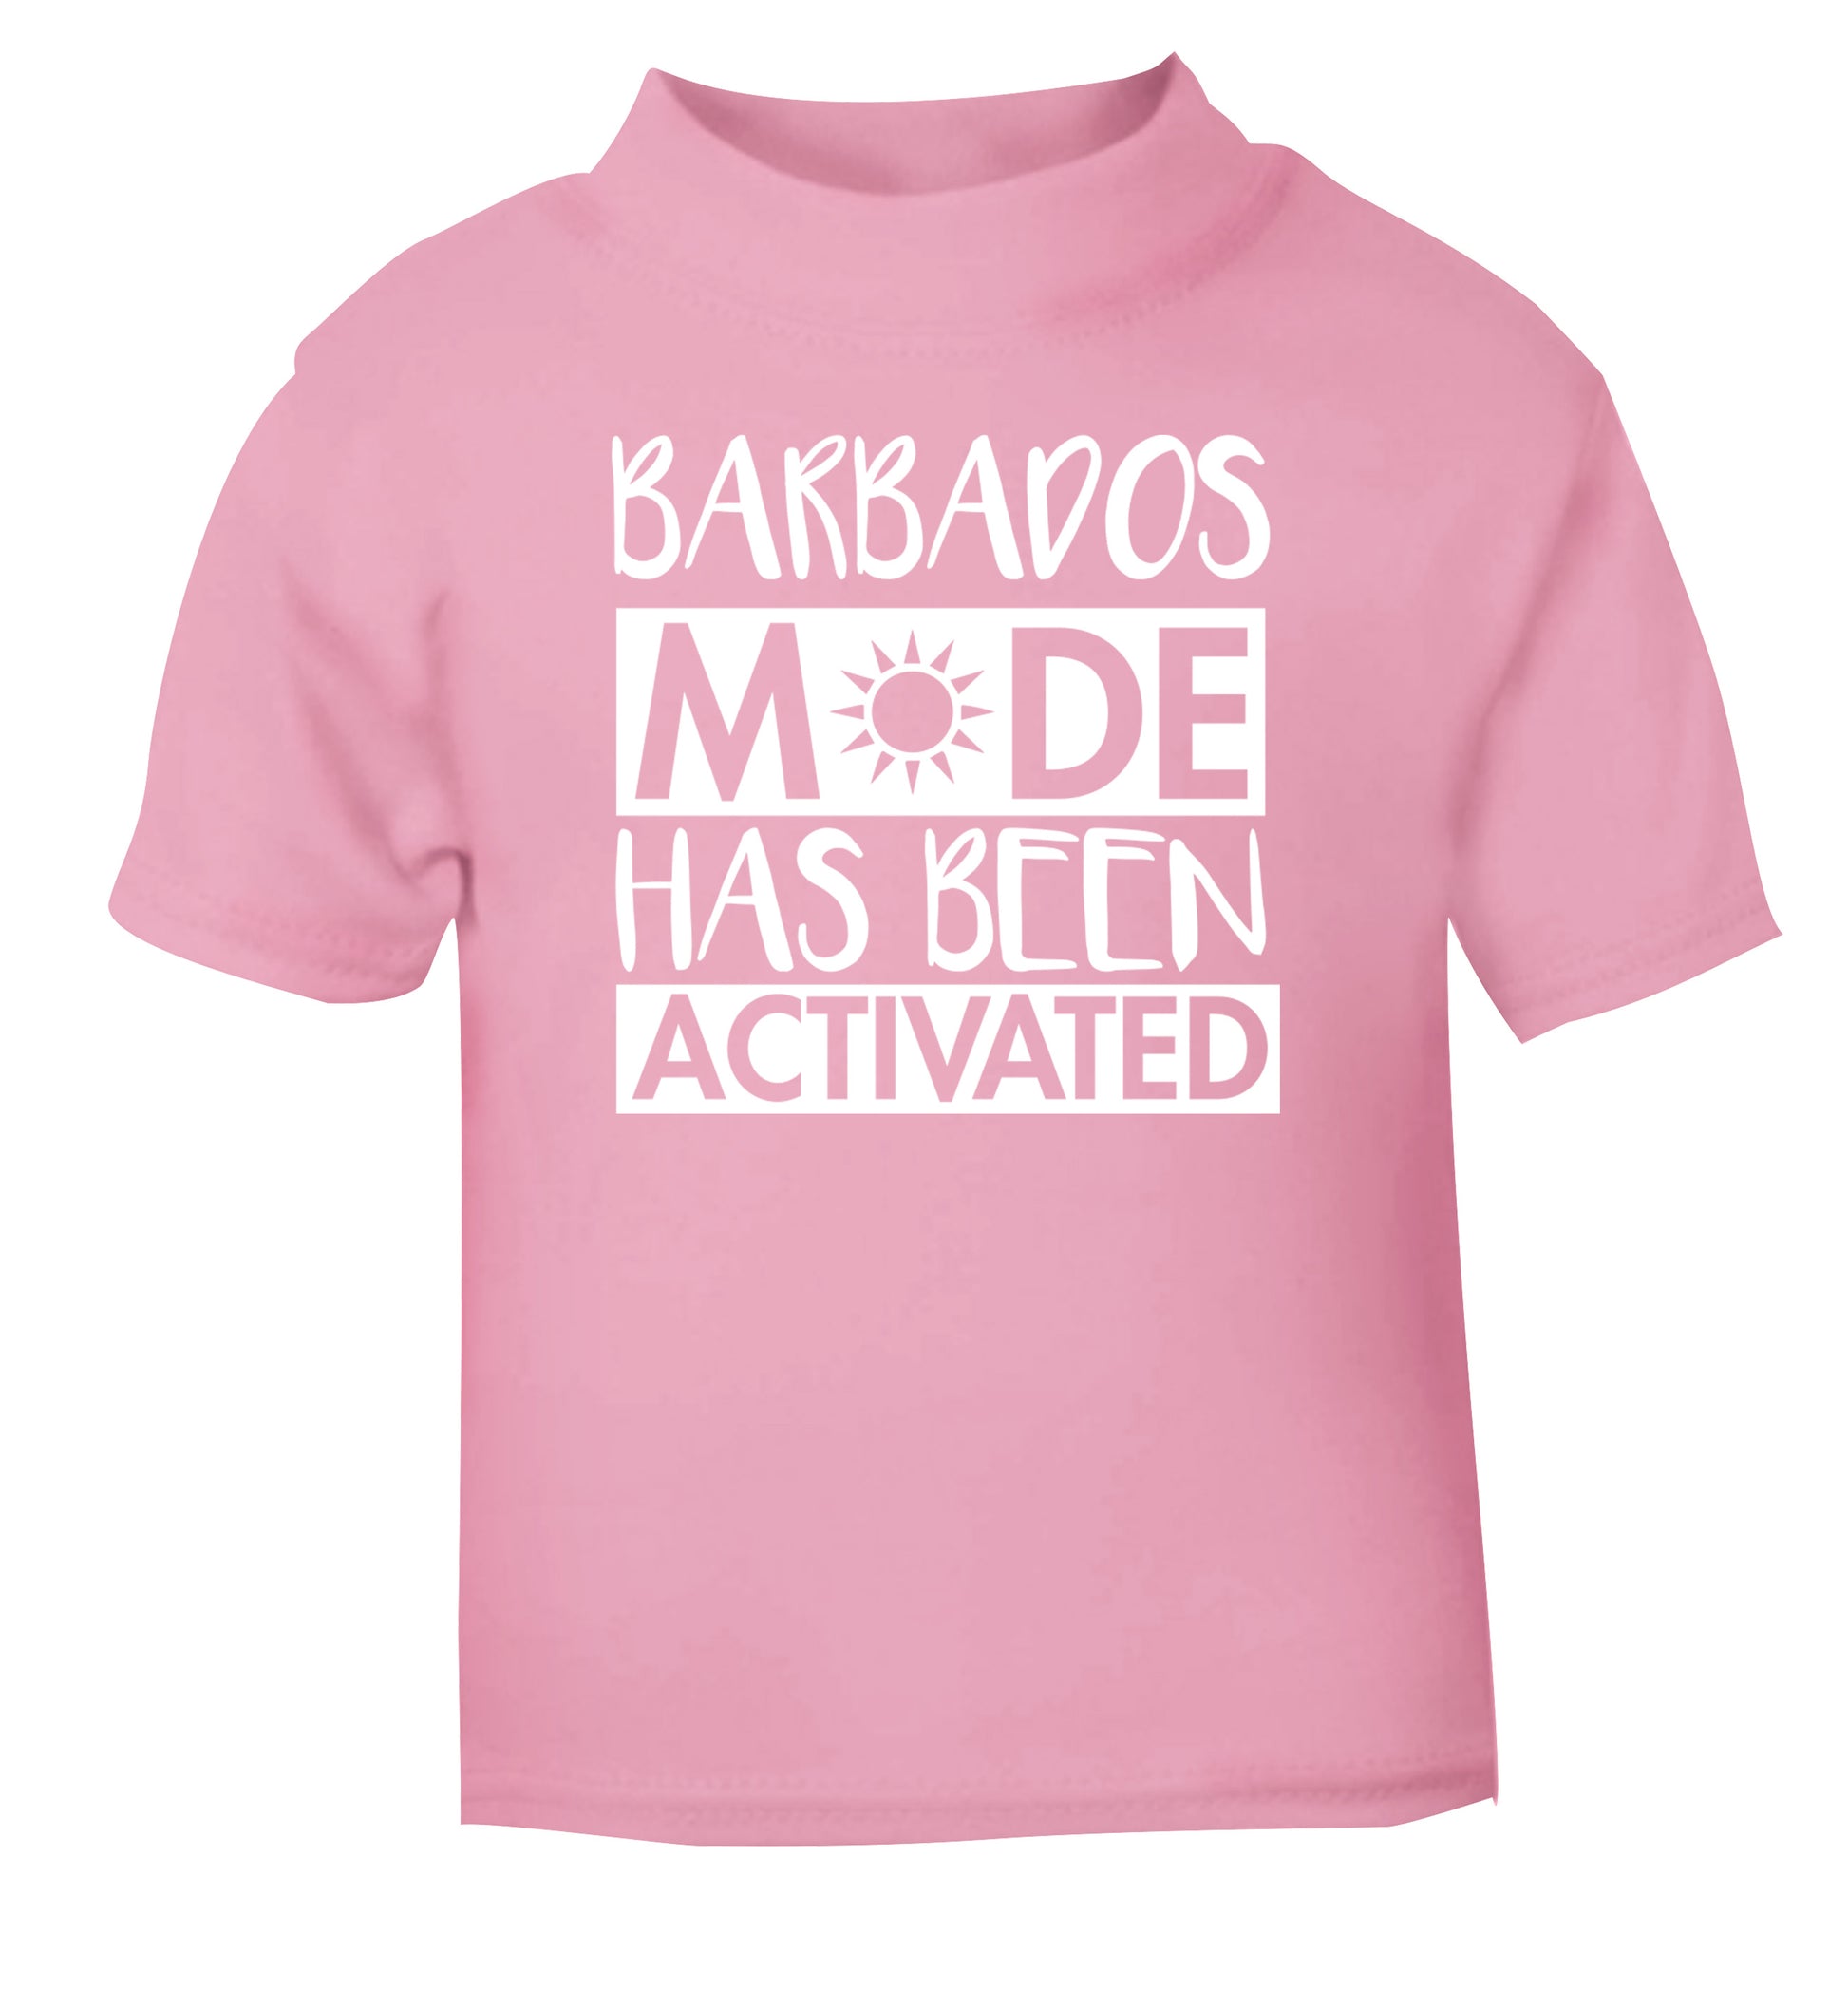 Barbados mode has been activated light pink Baby Toddler Tshirt 2 Years